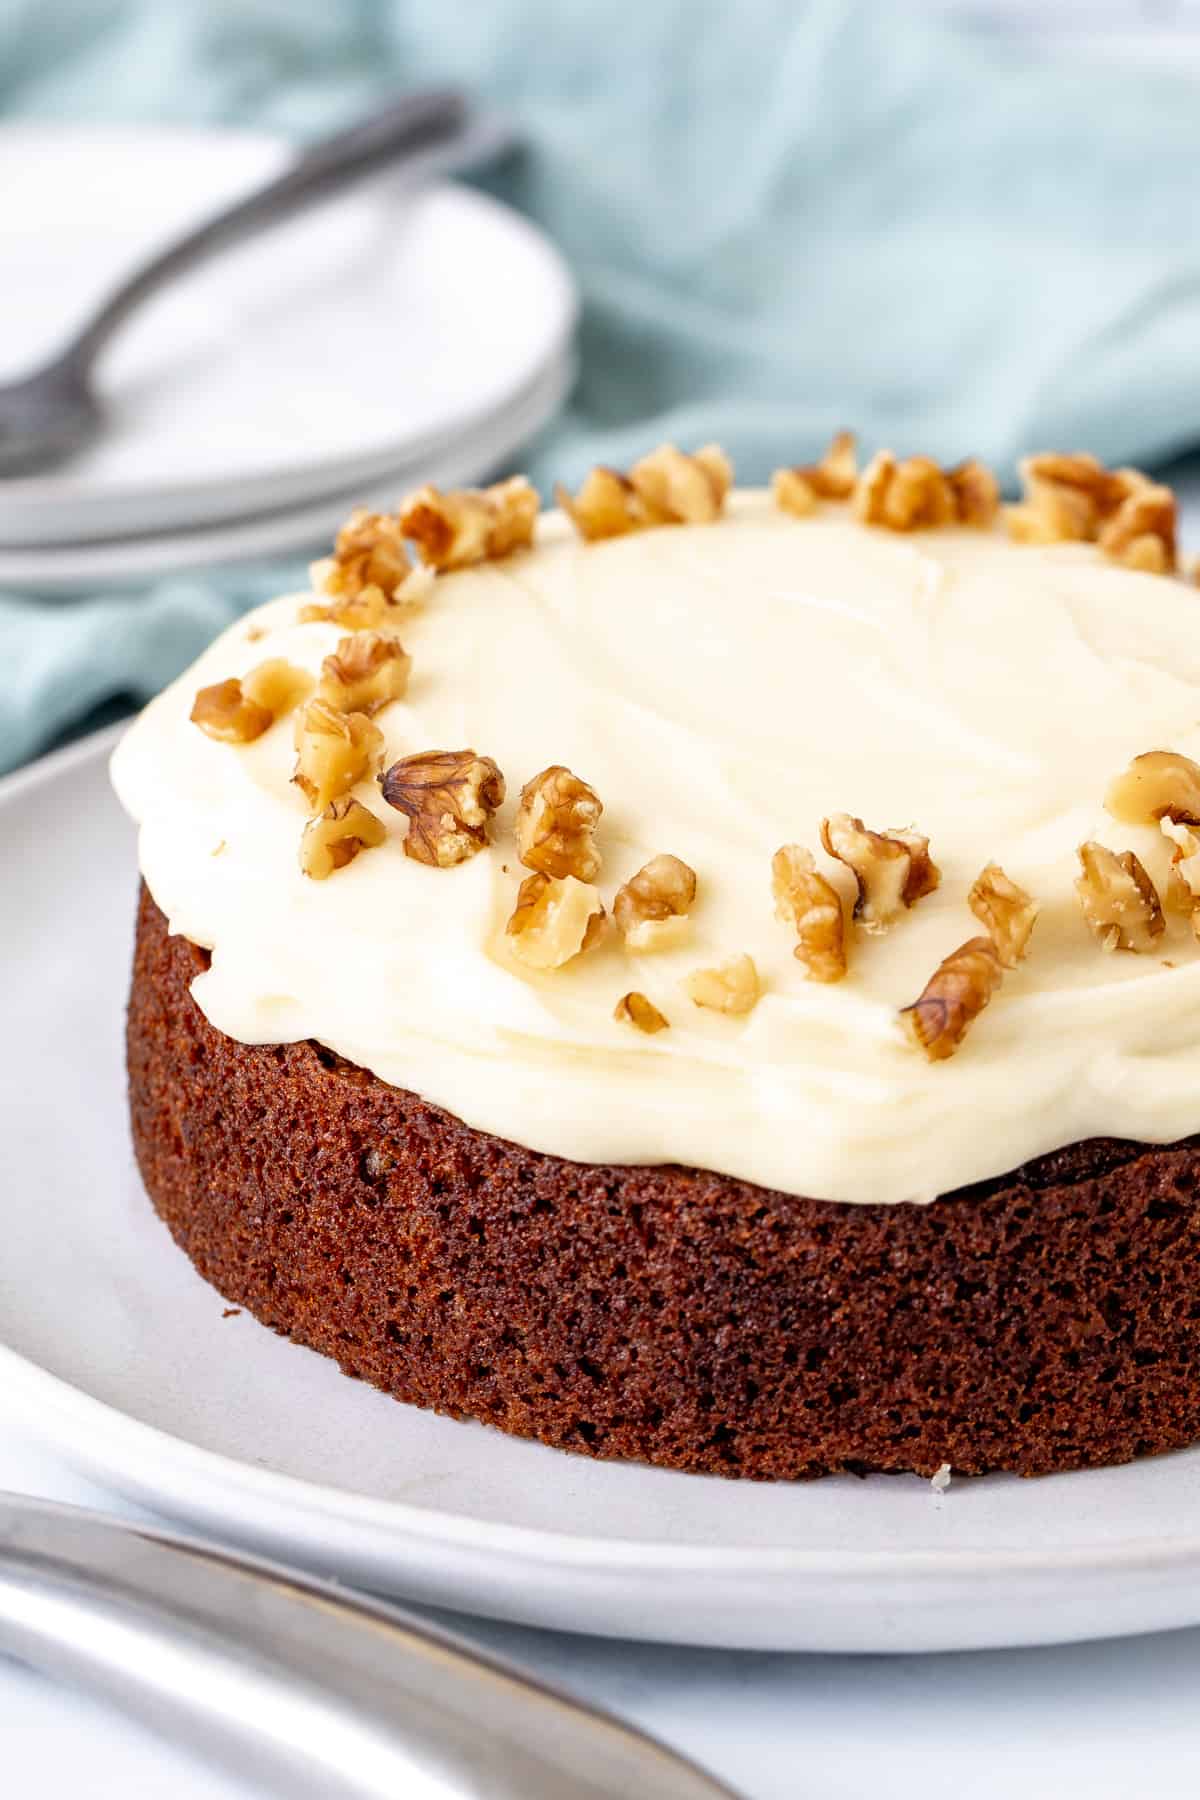 6-inch round mini carrot cake with cream cheese frosting and walnuts around the edges